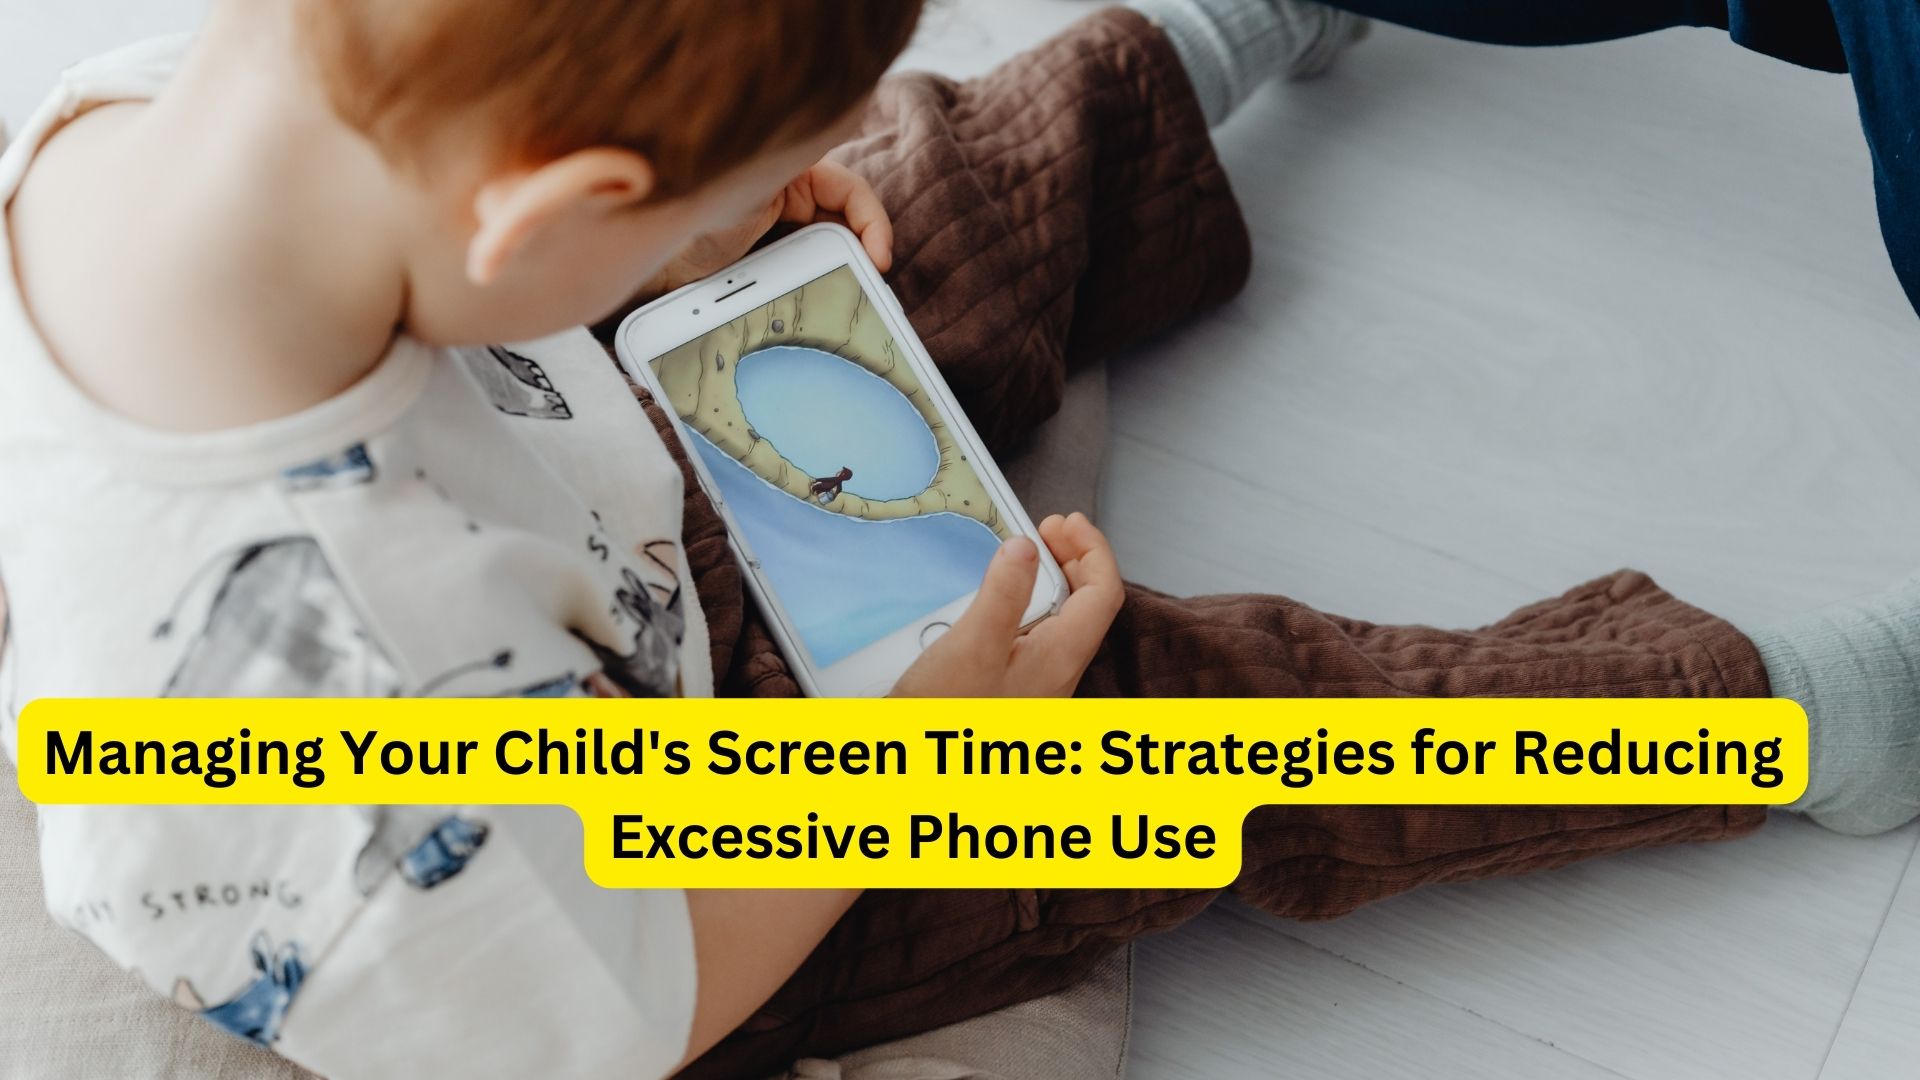 Managing Your Child's Screen Time: Strategies for Reducing Excessive Phone Use